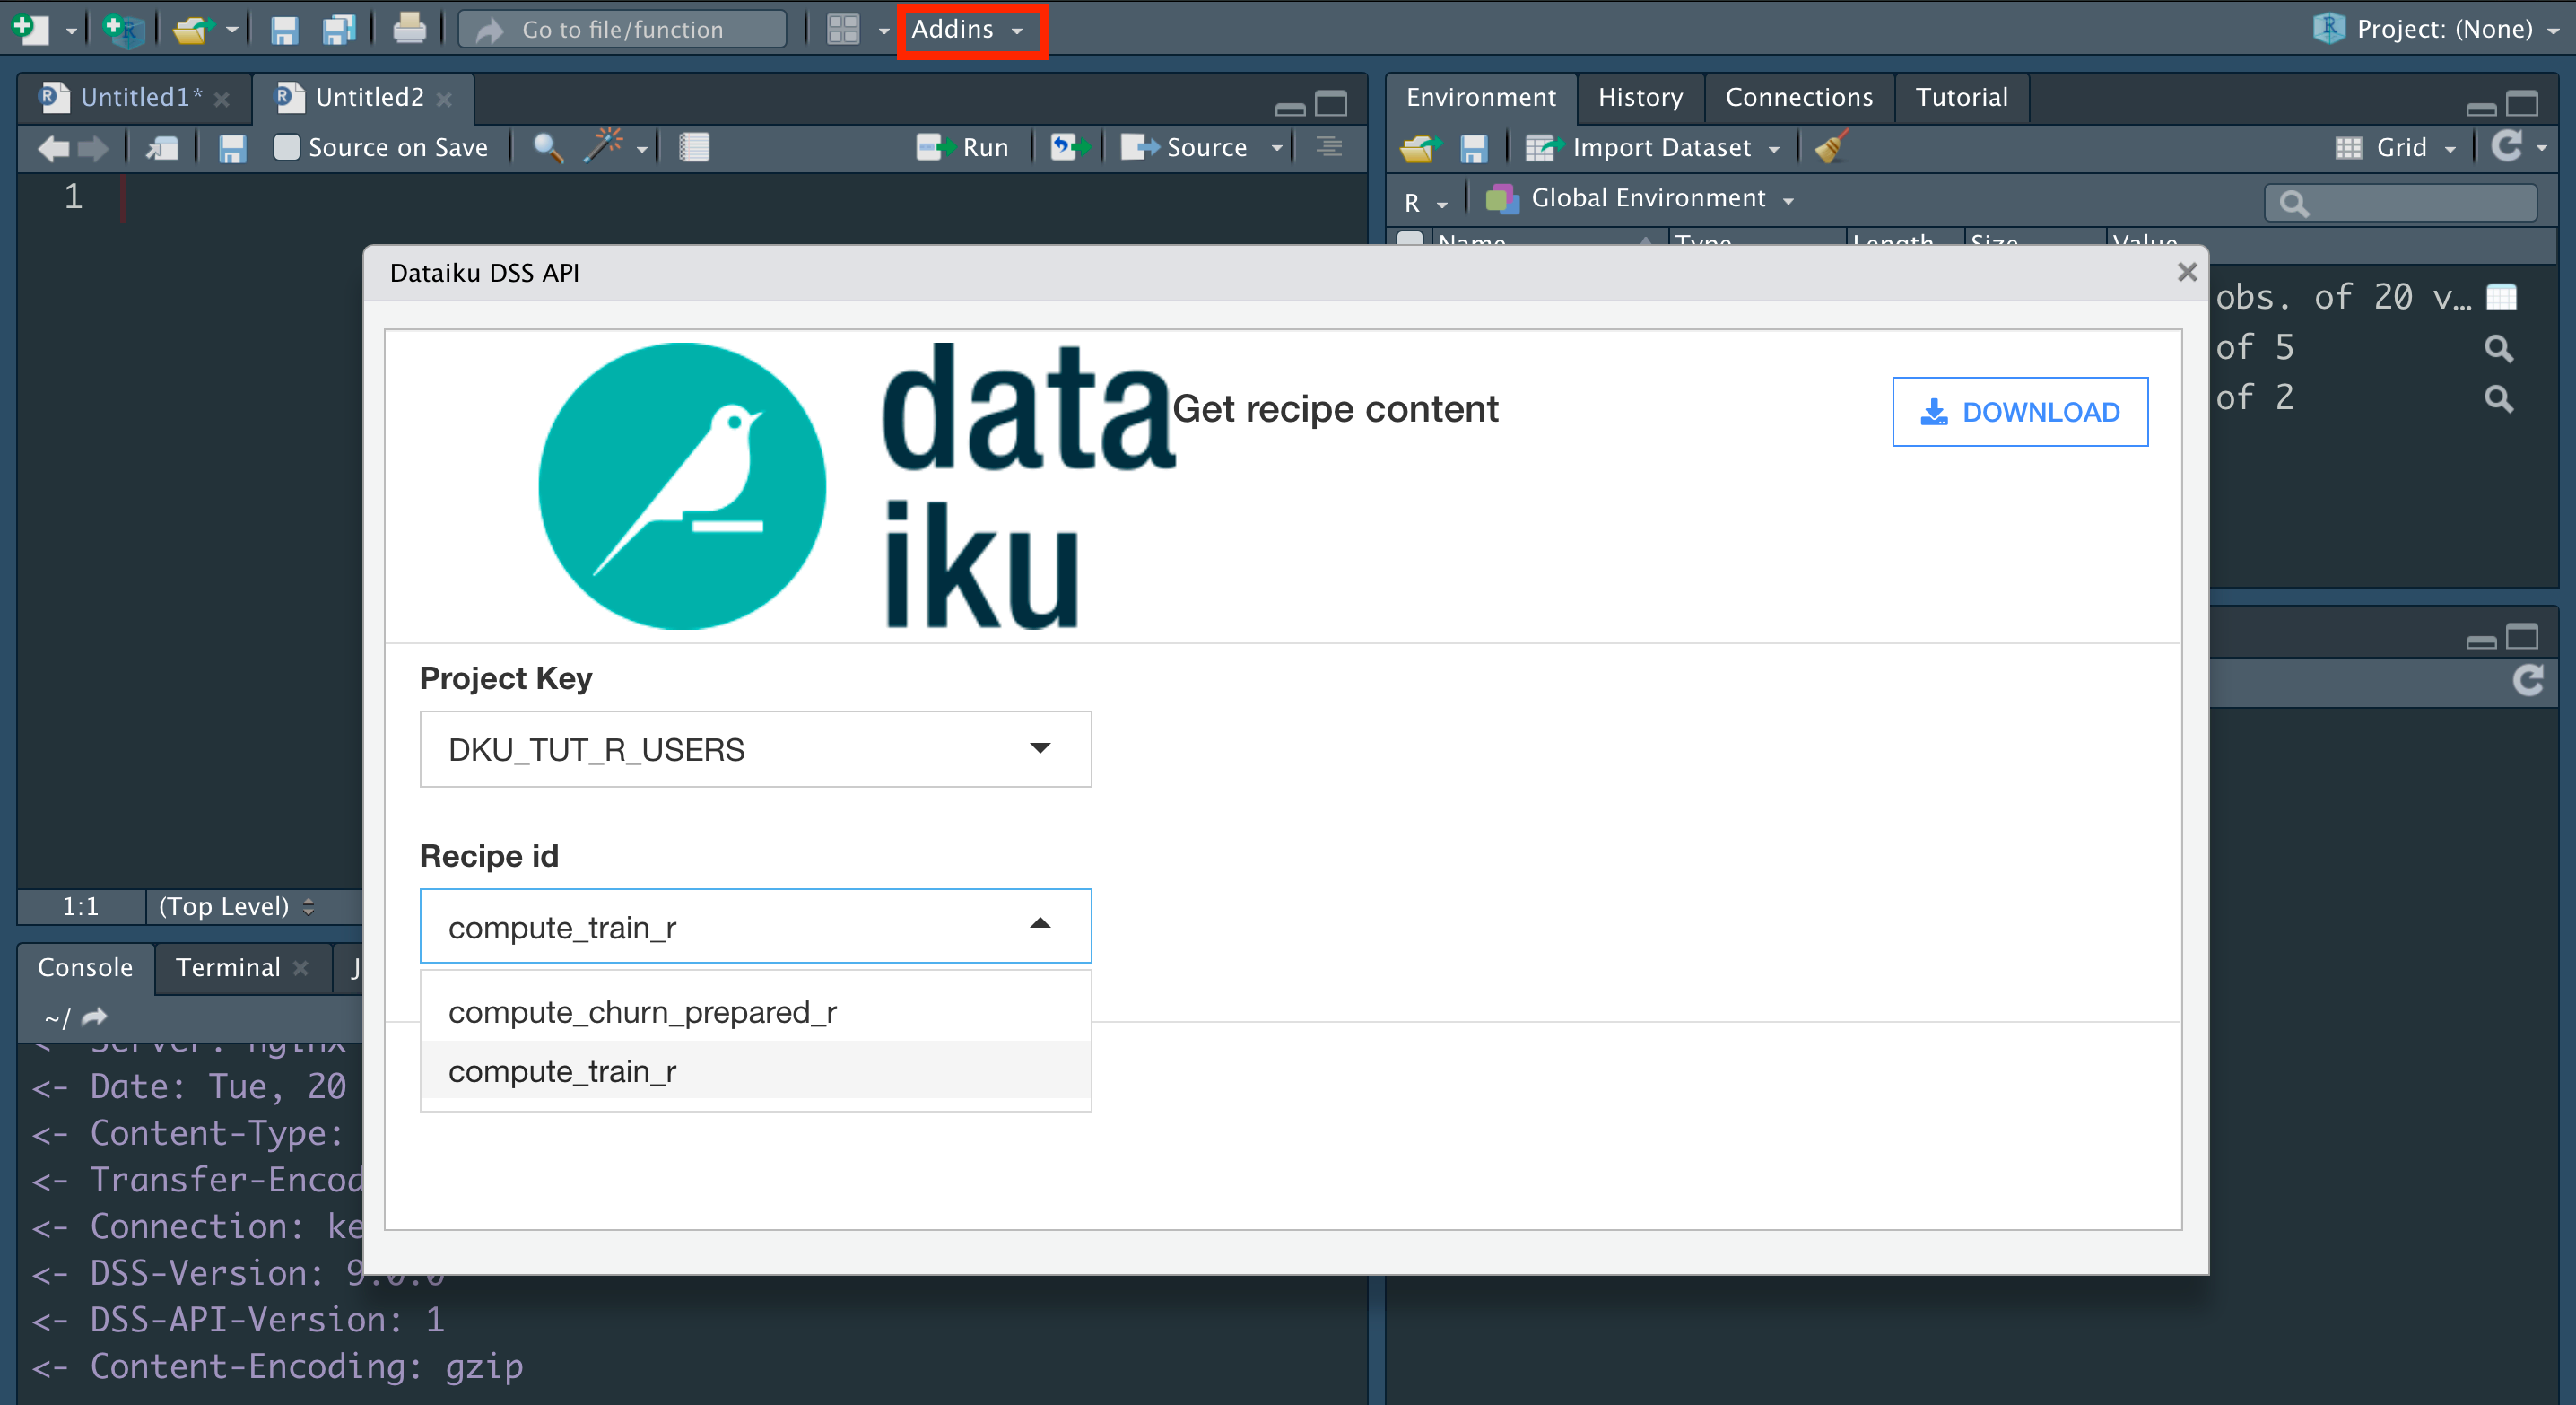 Dialog window from RStudio addin asking user which recipe from which project key to download